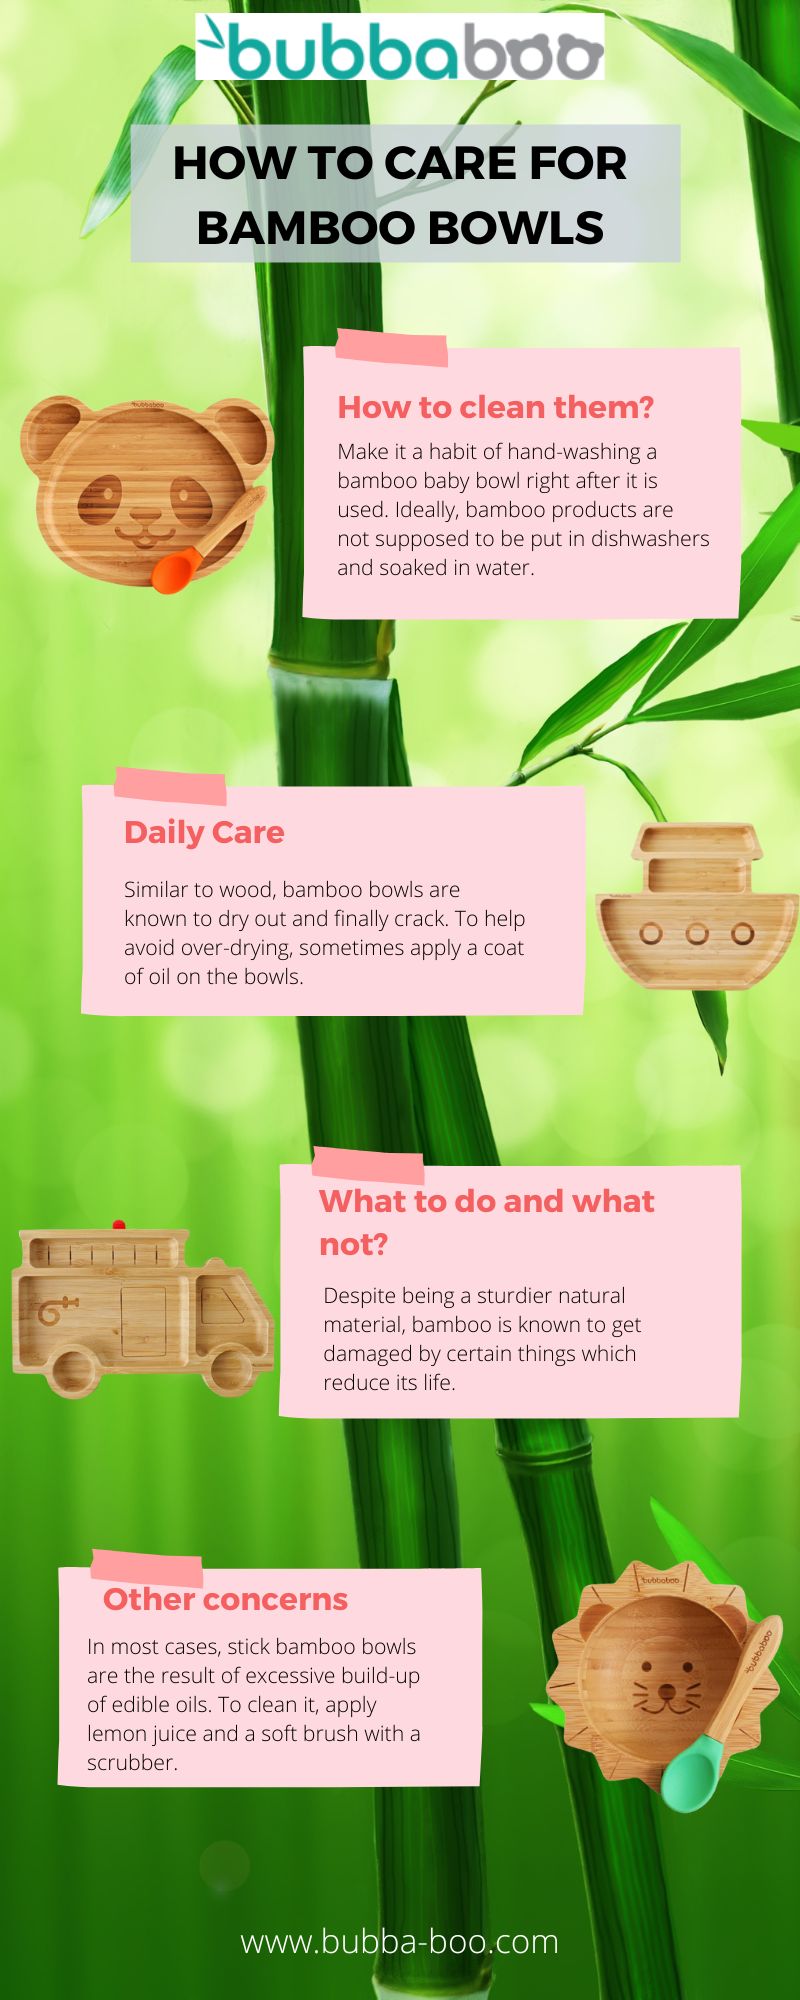 How to Care for Bamboo Bowls